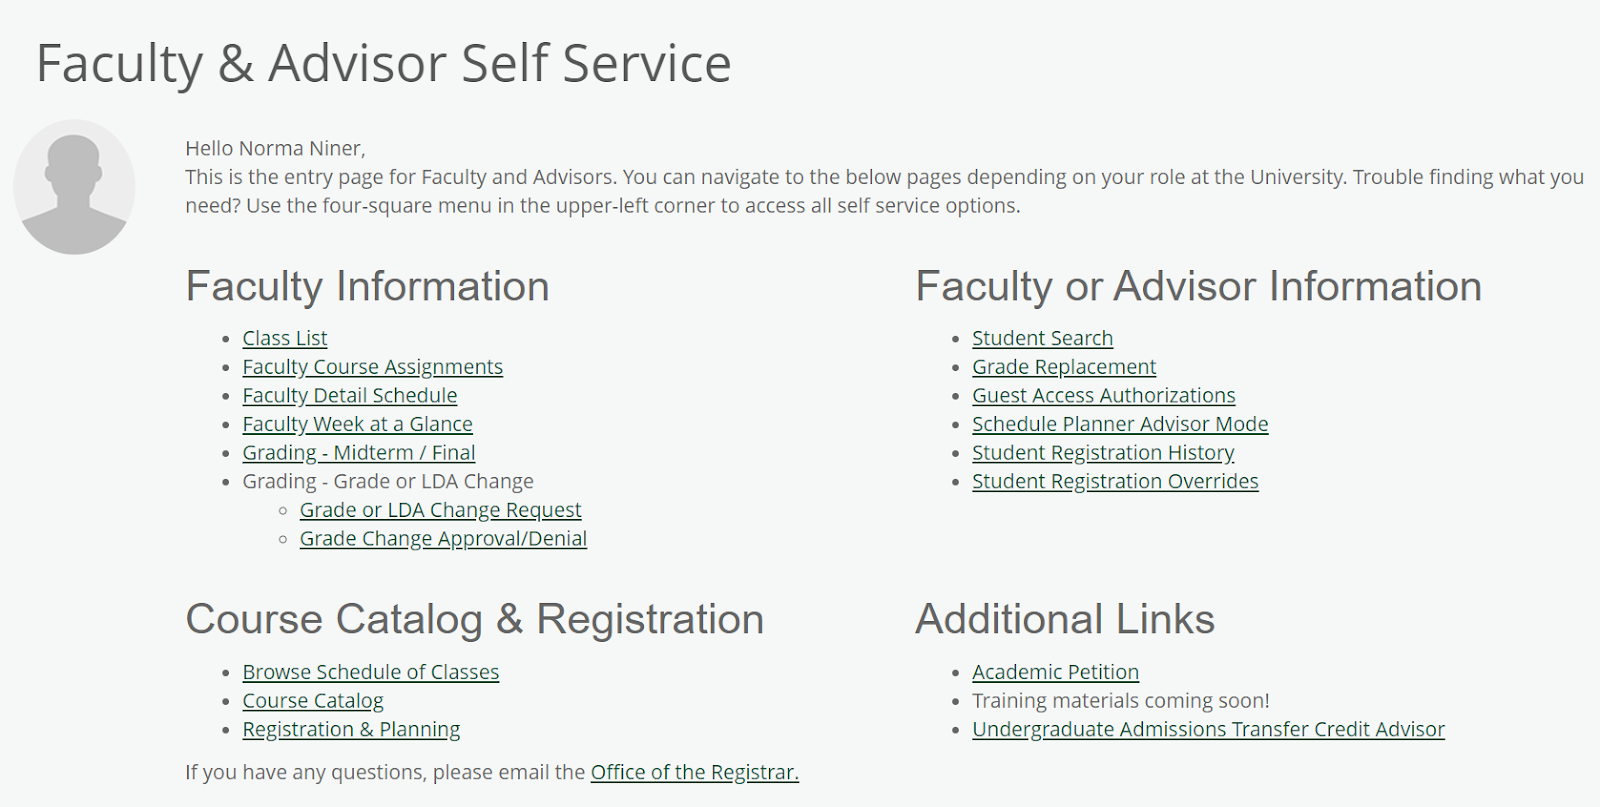 Faculty and Advisor Self Service page